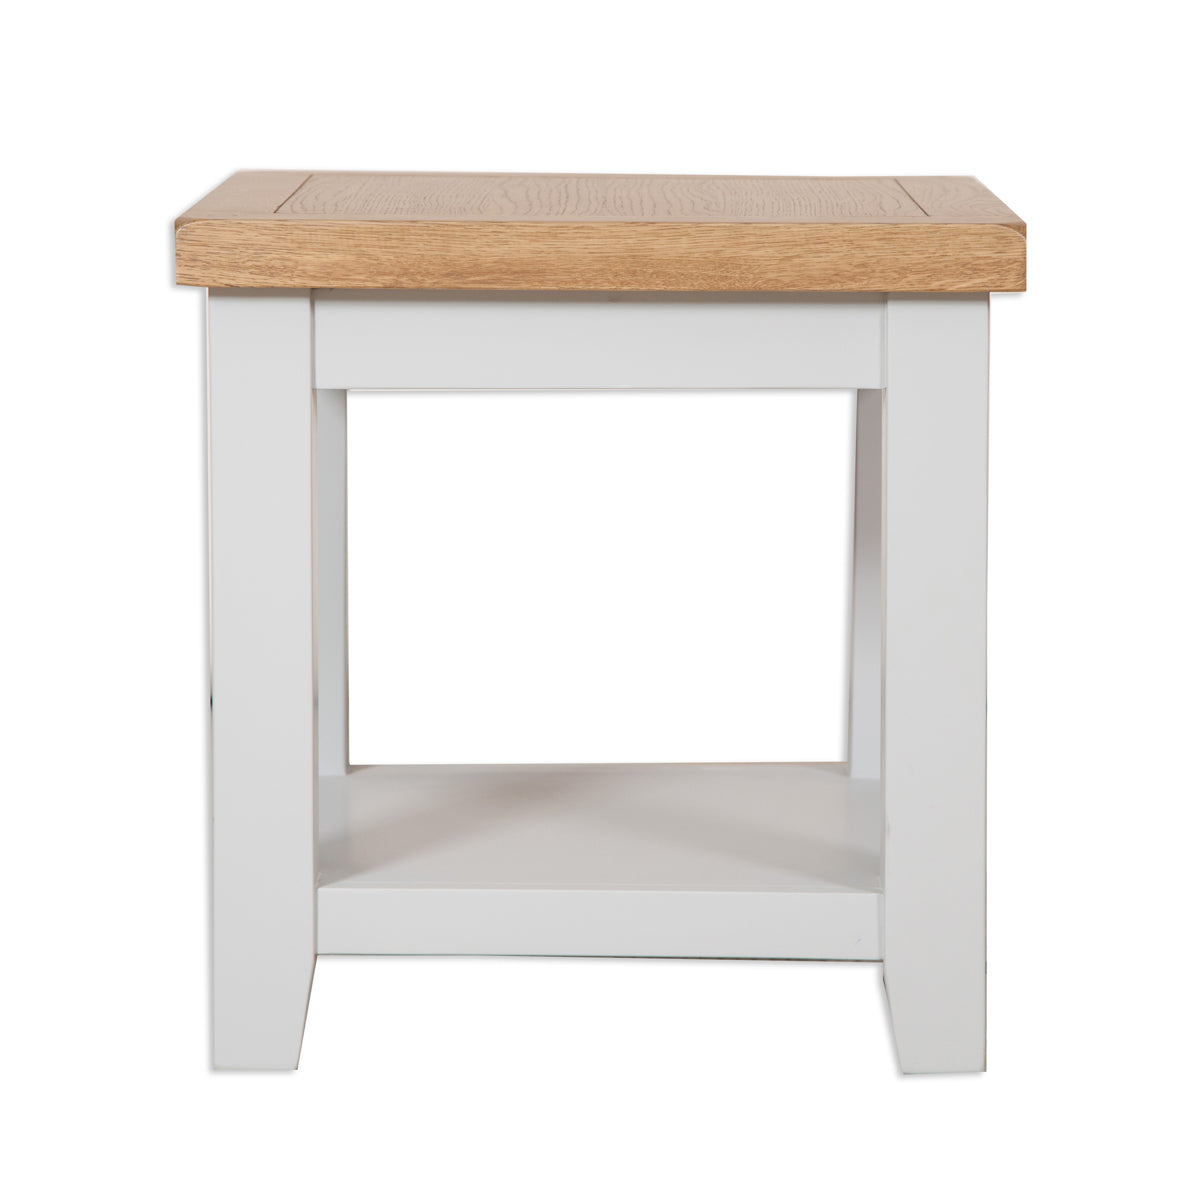 Cornish Stone Grey Square Lamp Table with Oak Top